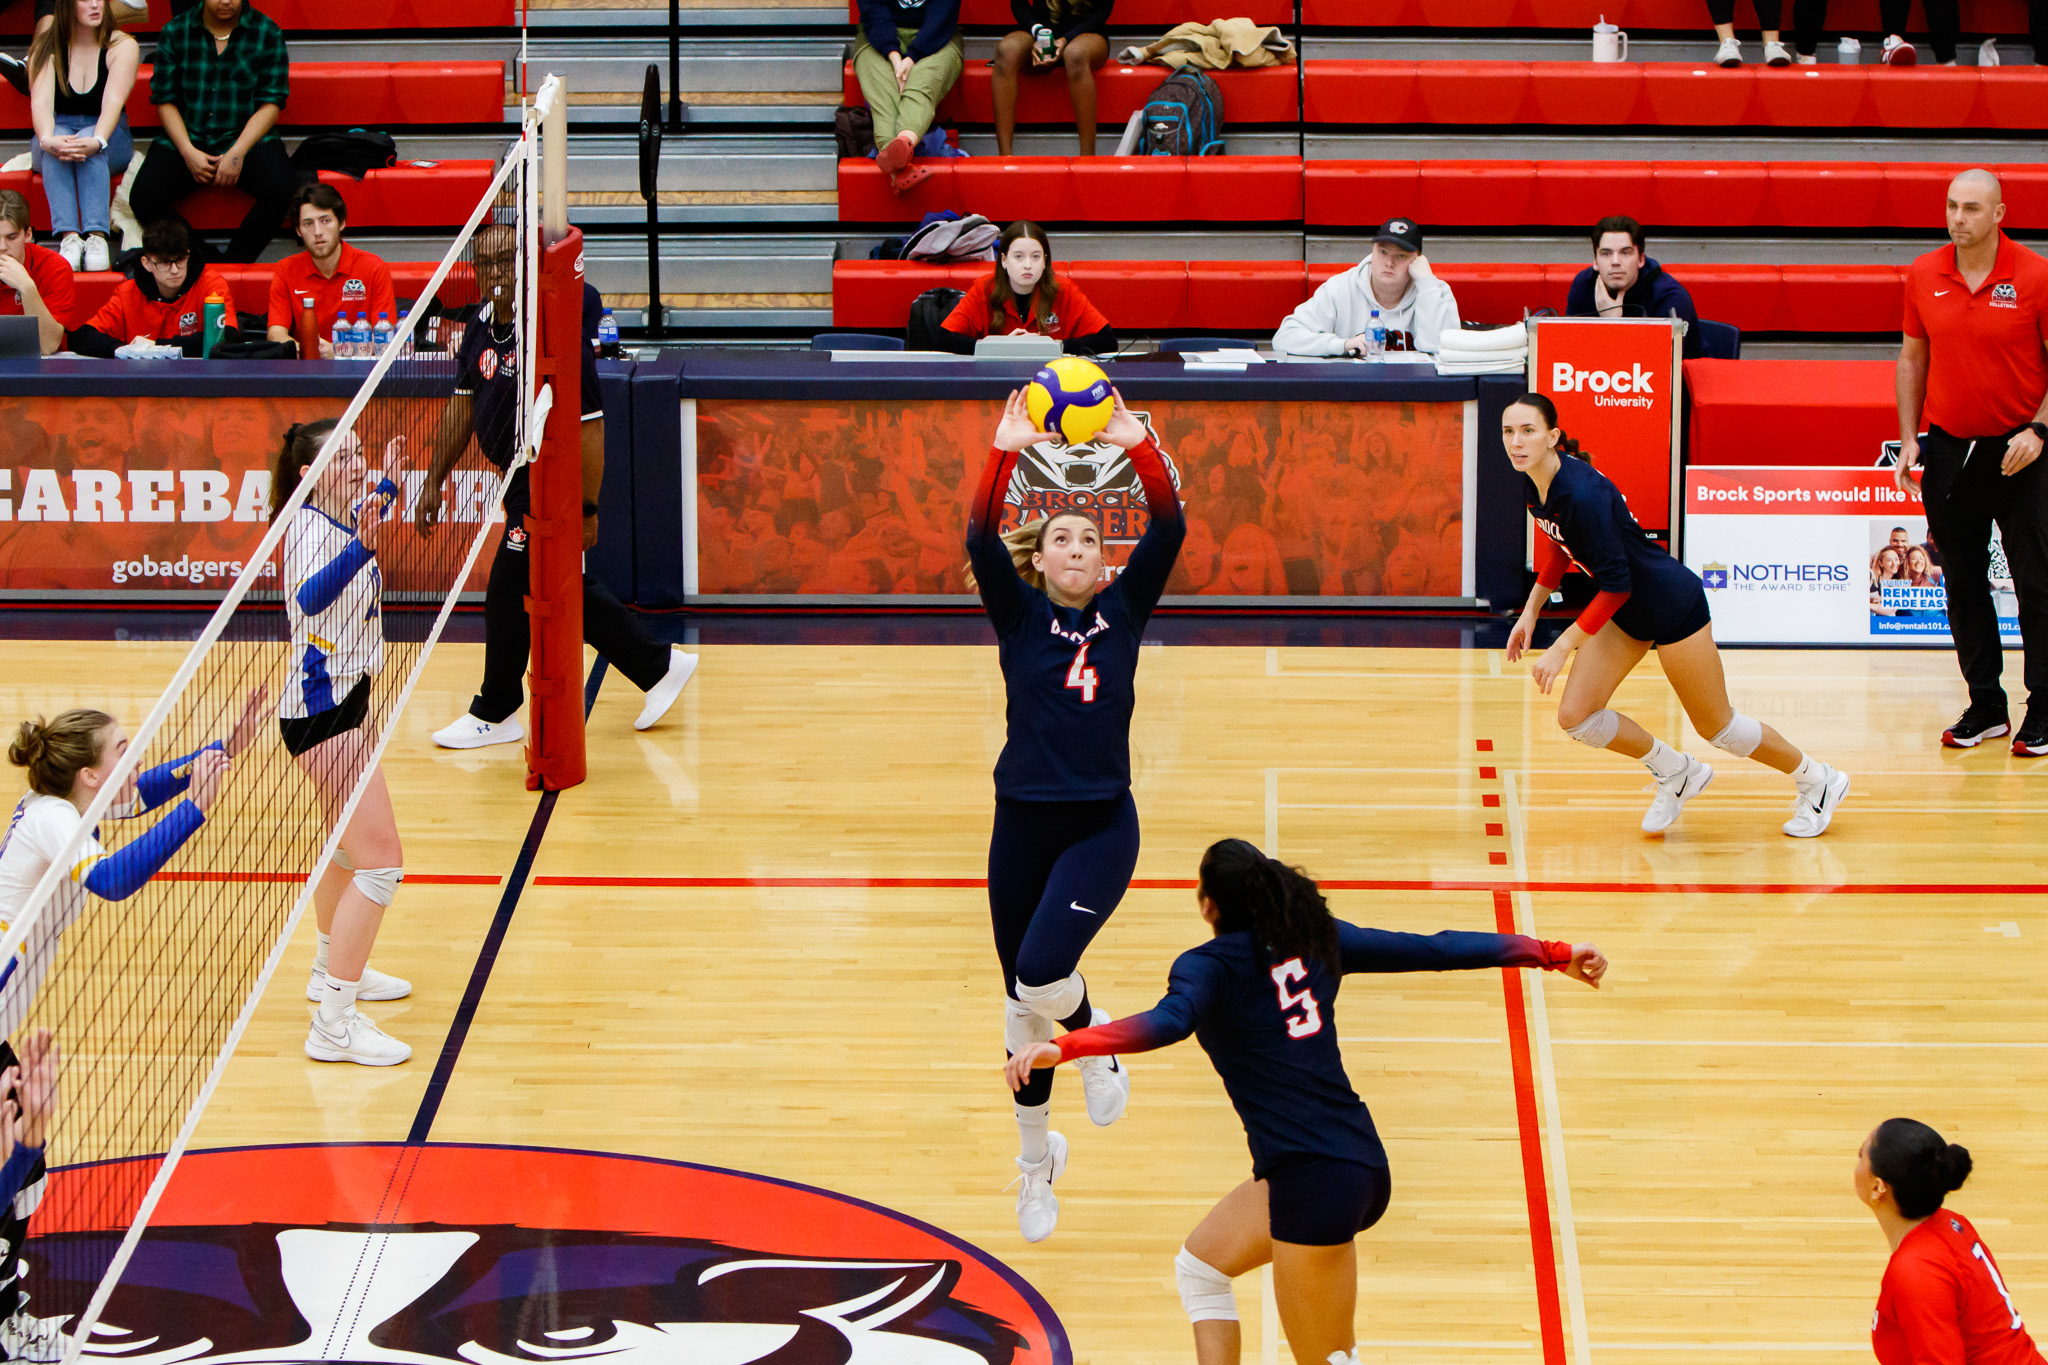 Image of a volleyball court. Brock Women's volleyball athlete Sara Rohr is jumping in the middle of the court with the net on the left and setting the ball.